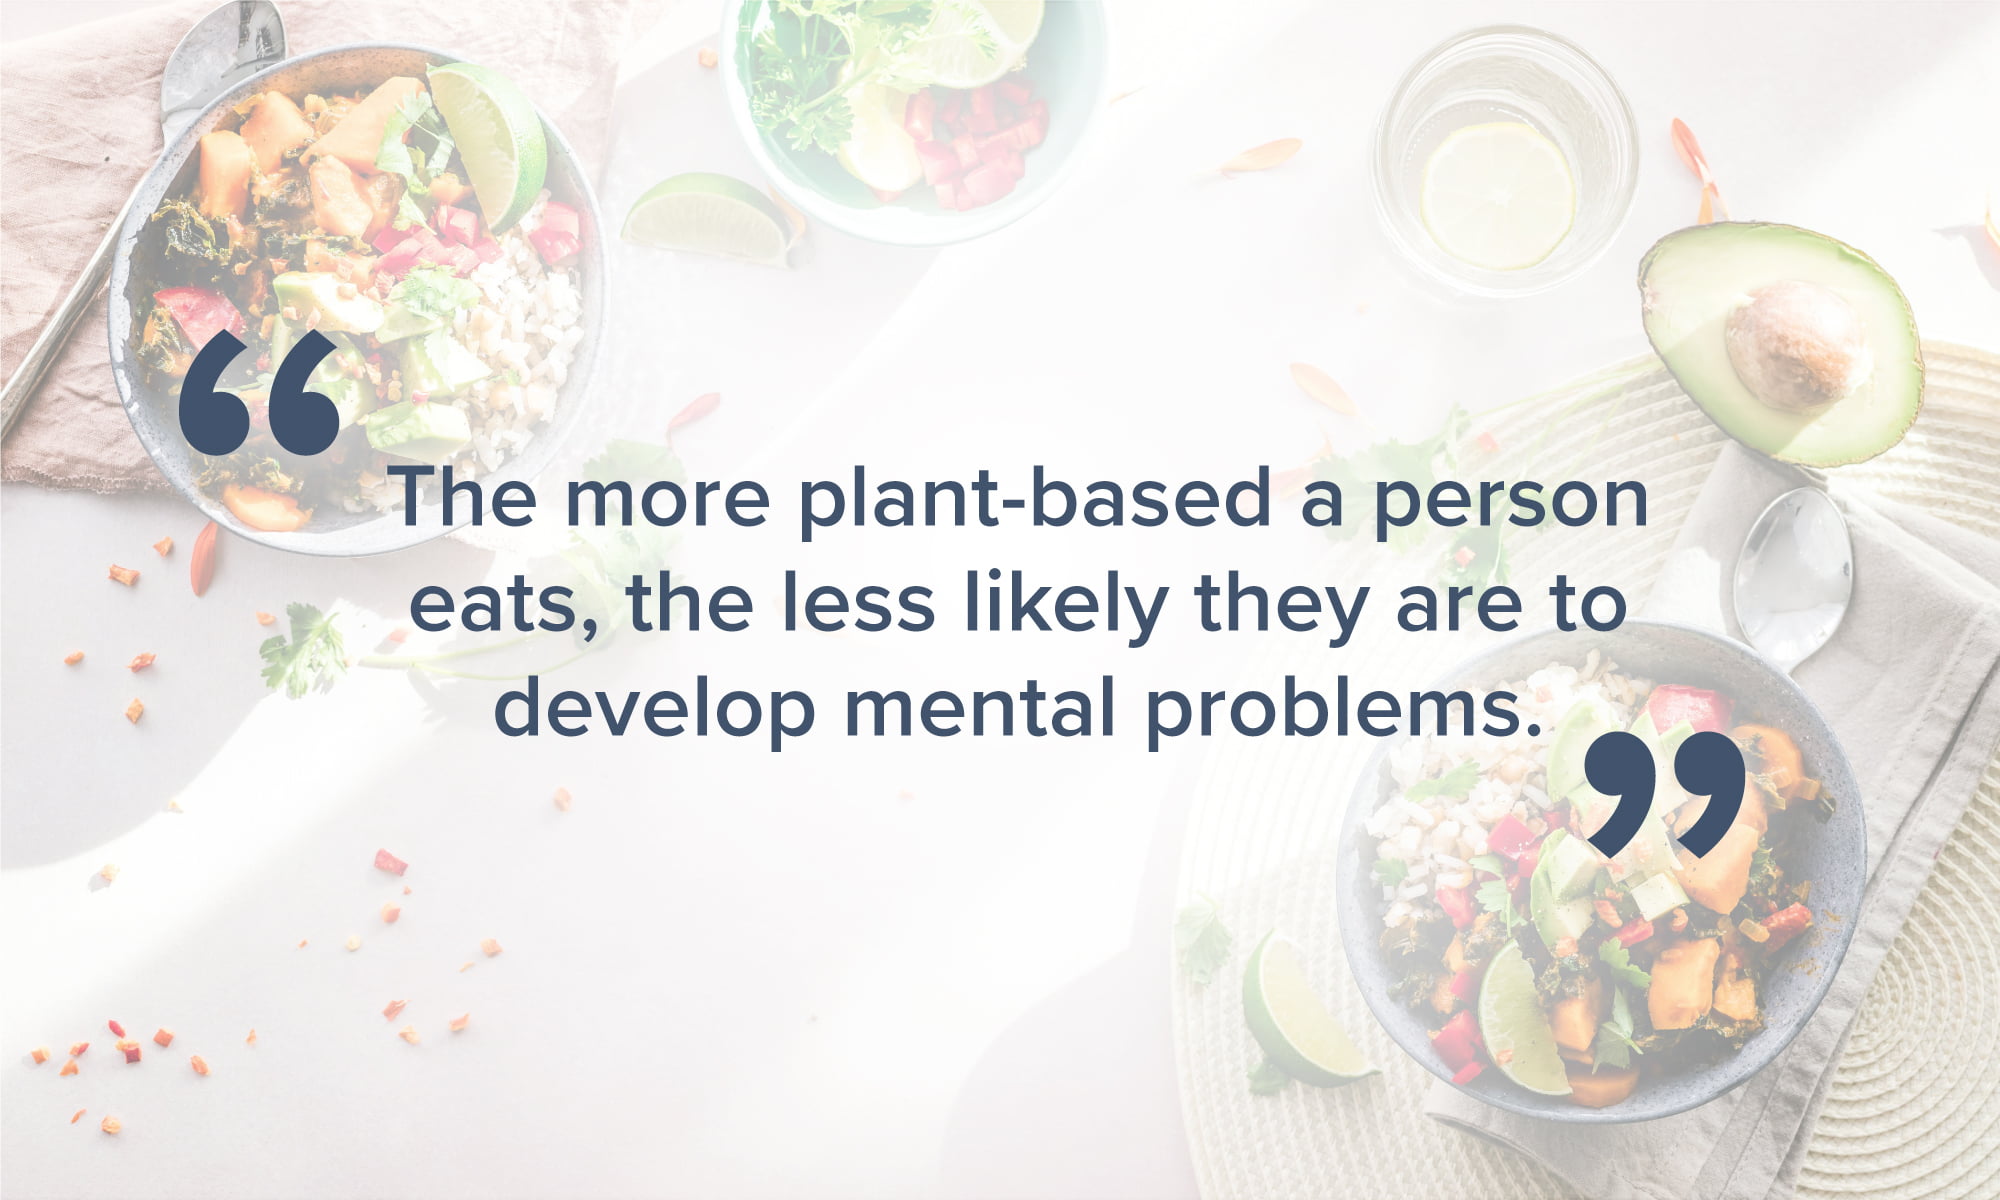 An illustration featuring bowls of food with a quote in the foreground: "The more plant-based a person eats, the less likely they are to develop mental problems."